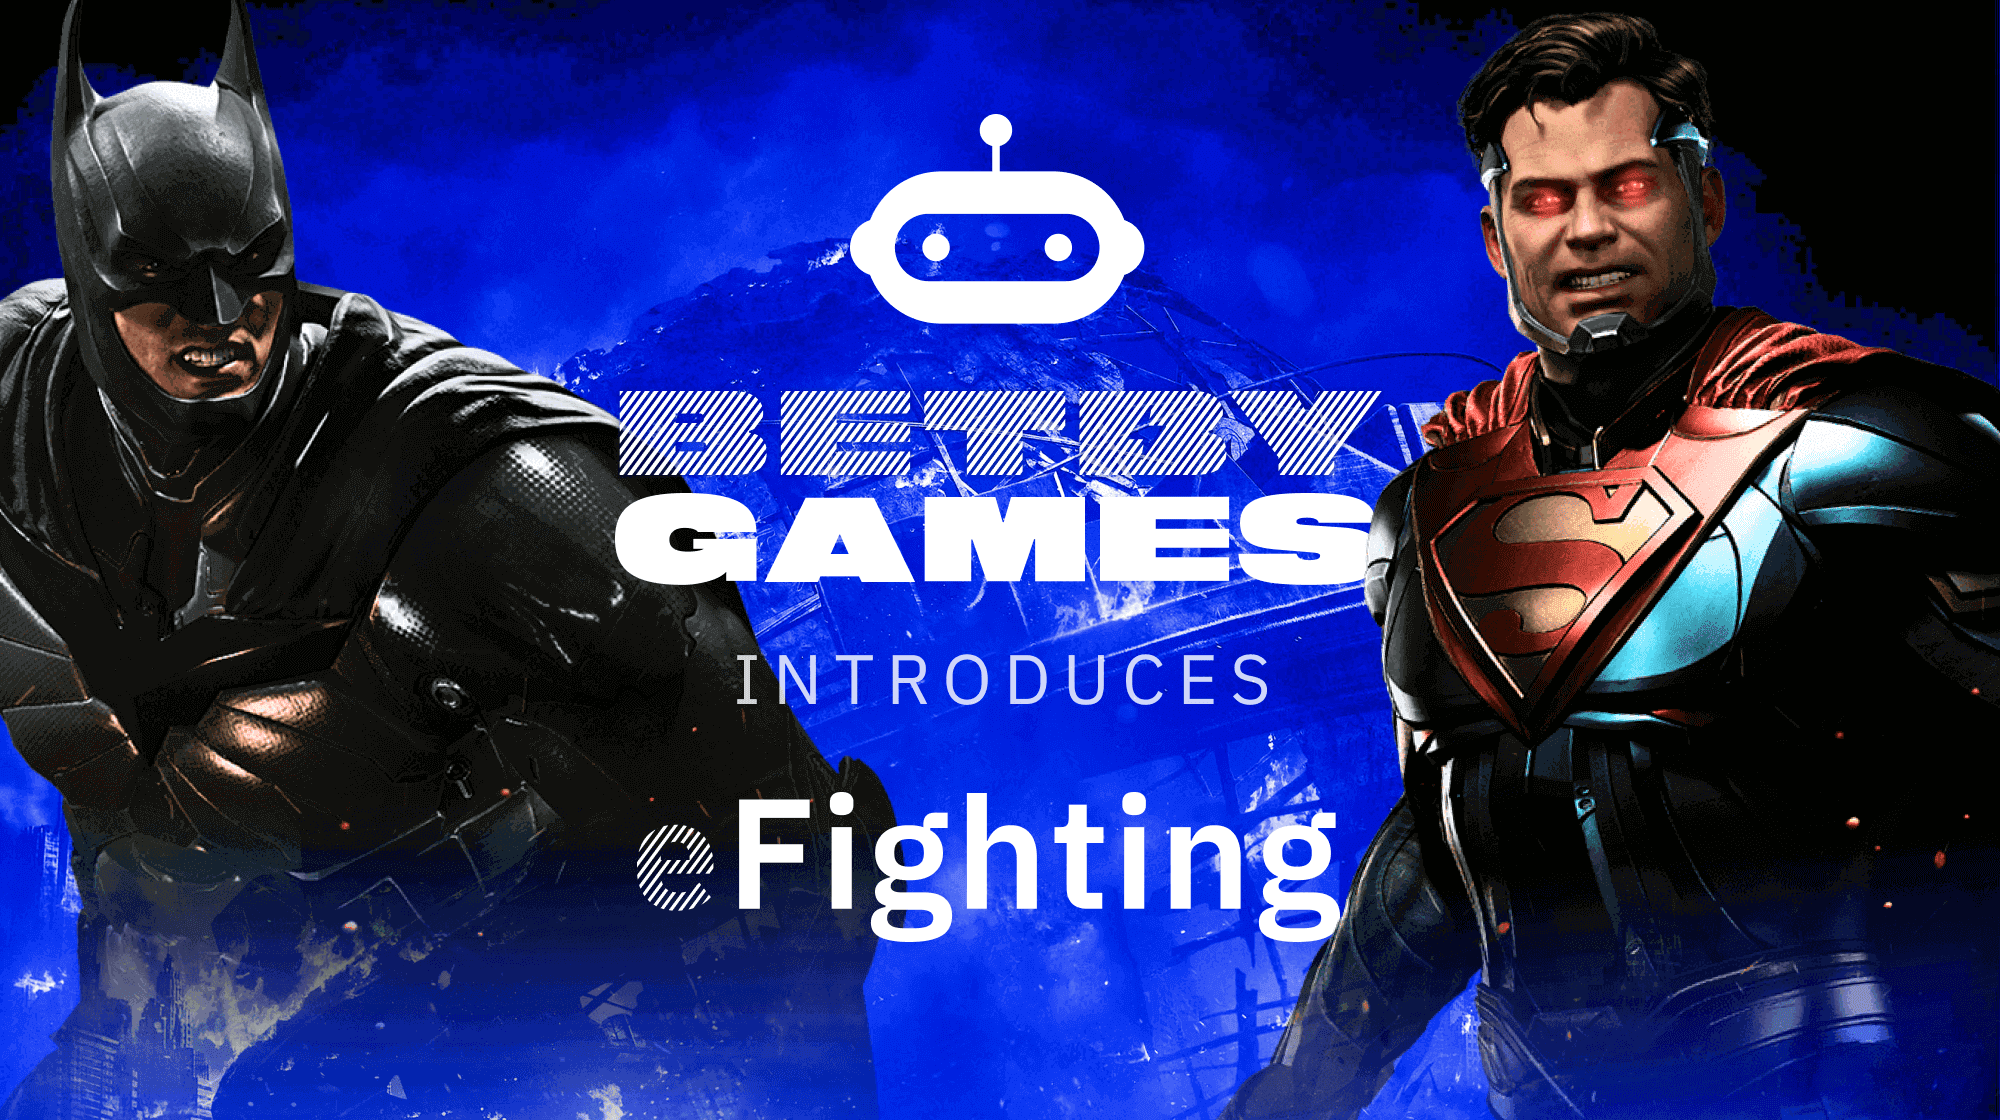 BETBY RELEASES THRILLING COMBAT EXPERIENCE WITH eFIGHTING BETBY.GAMES HIT